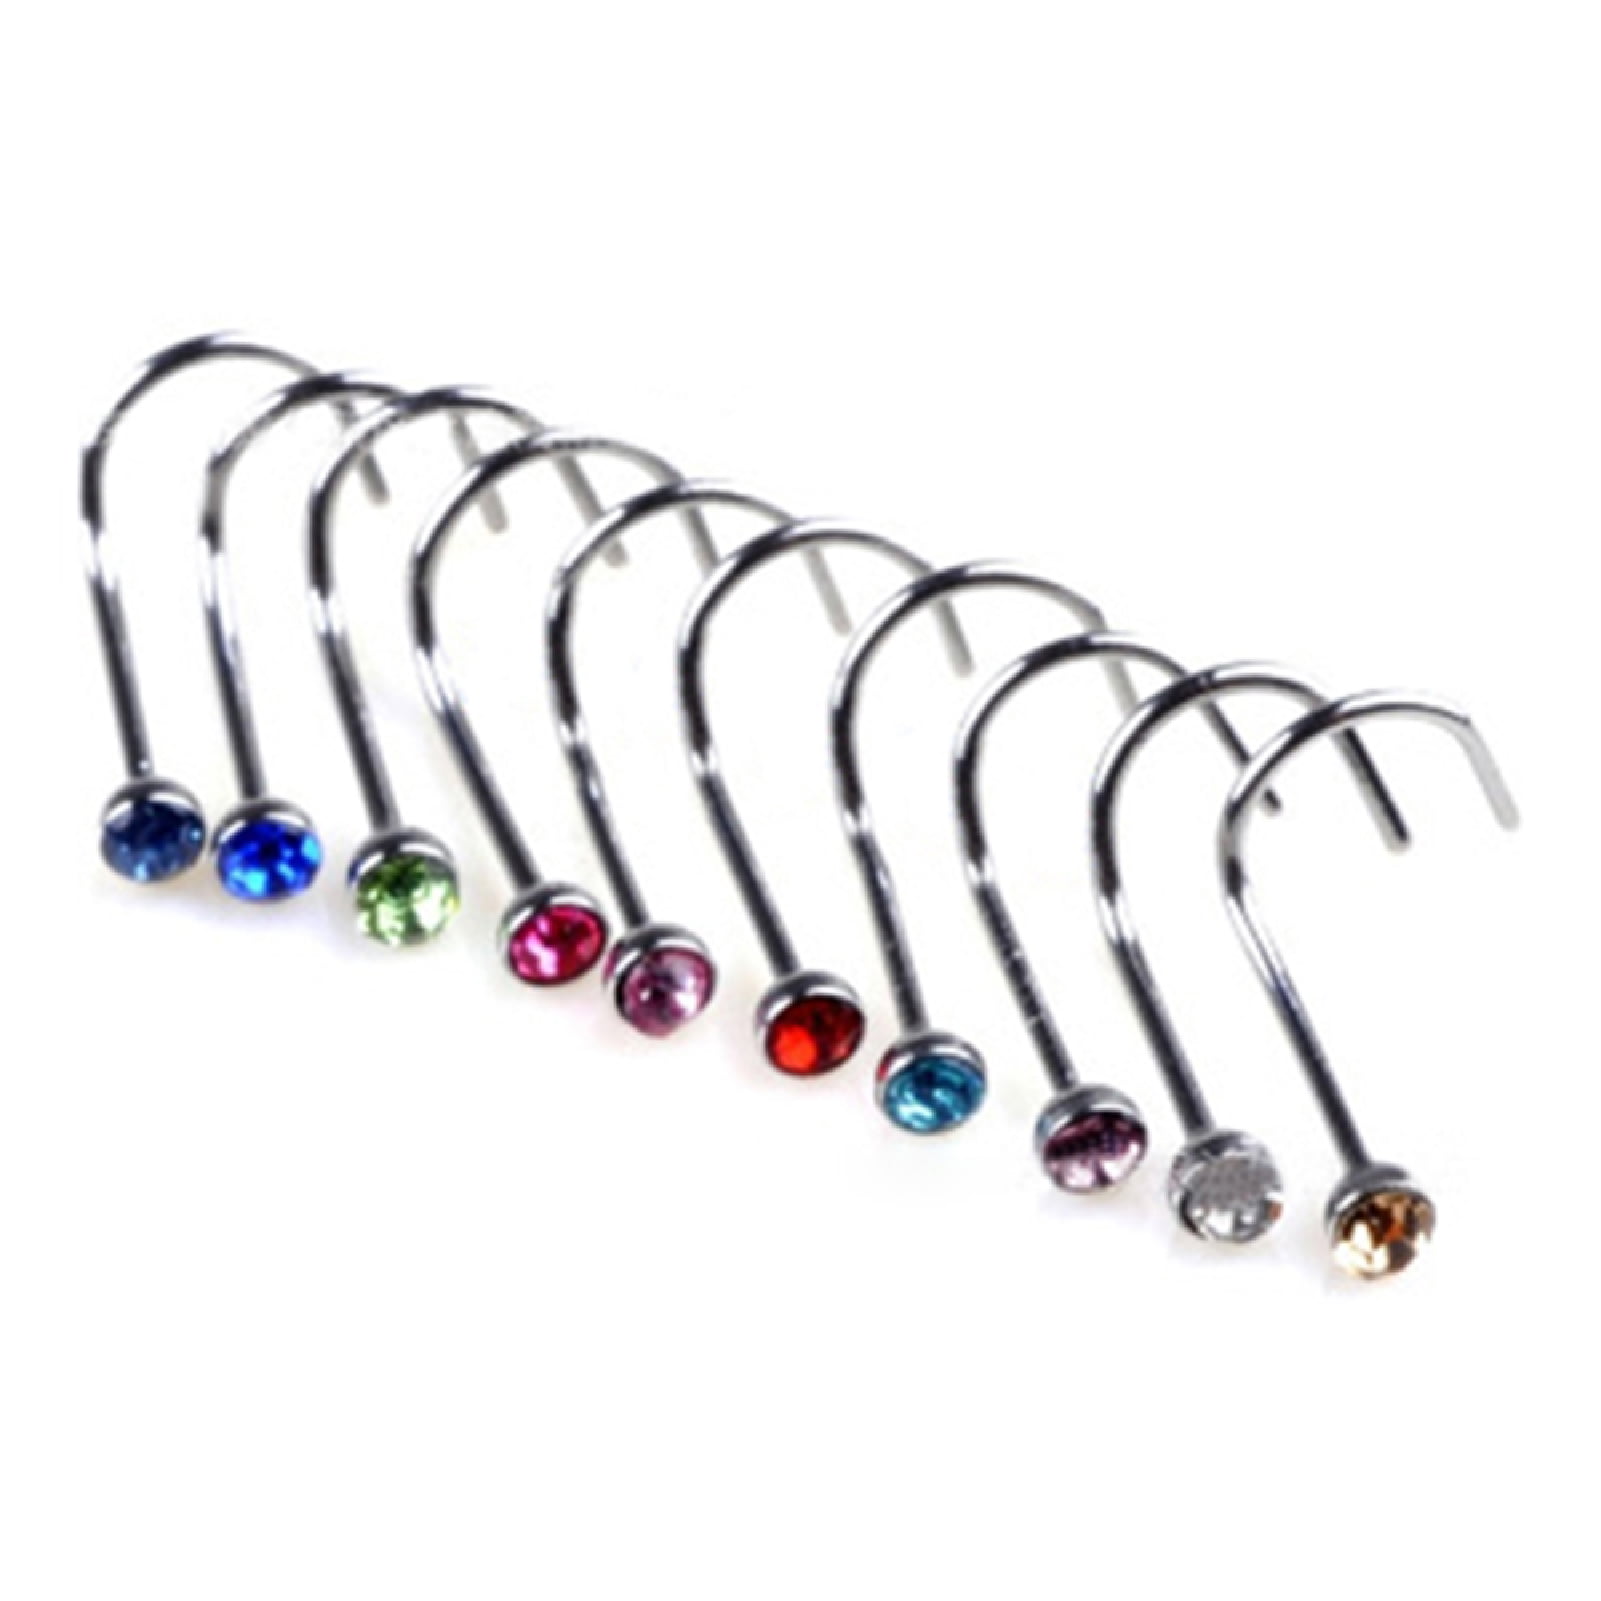 10PCS Small Gem Crystal Screw Nose Stud Ring Body Piercing Jewelry New